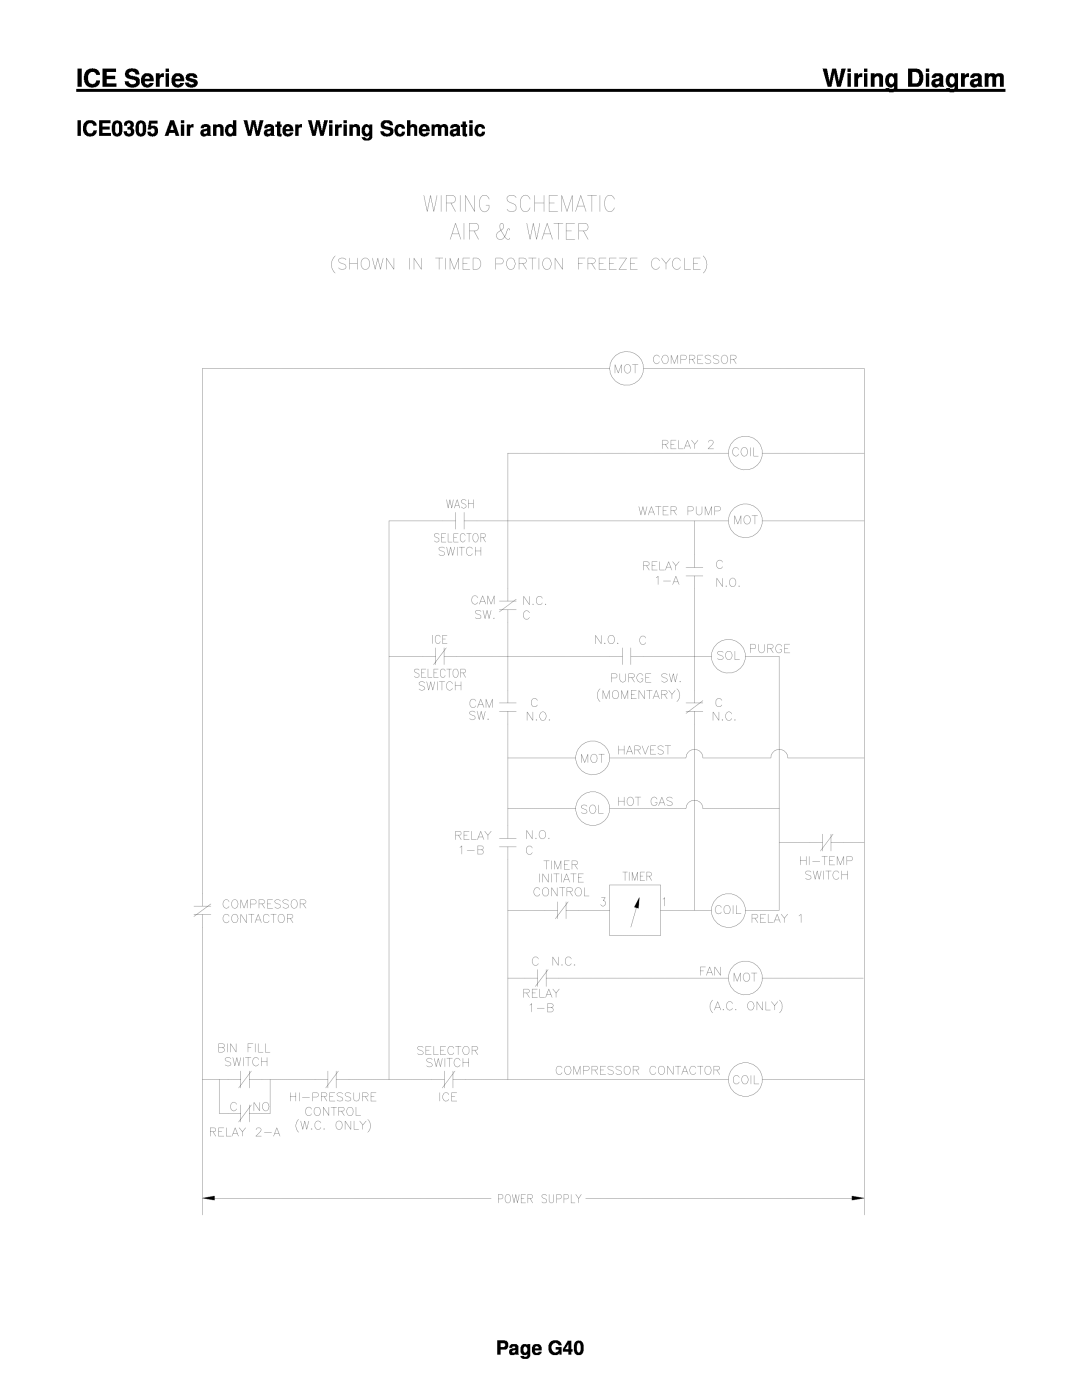 Ice-O-Matic ICE0250 Series installation manual ICE0305 Air and Water Wiring Schematic, ICE Series, Wiring Diagram, Page G40 